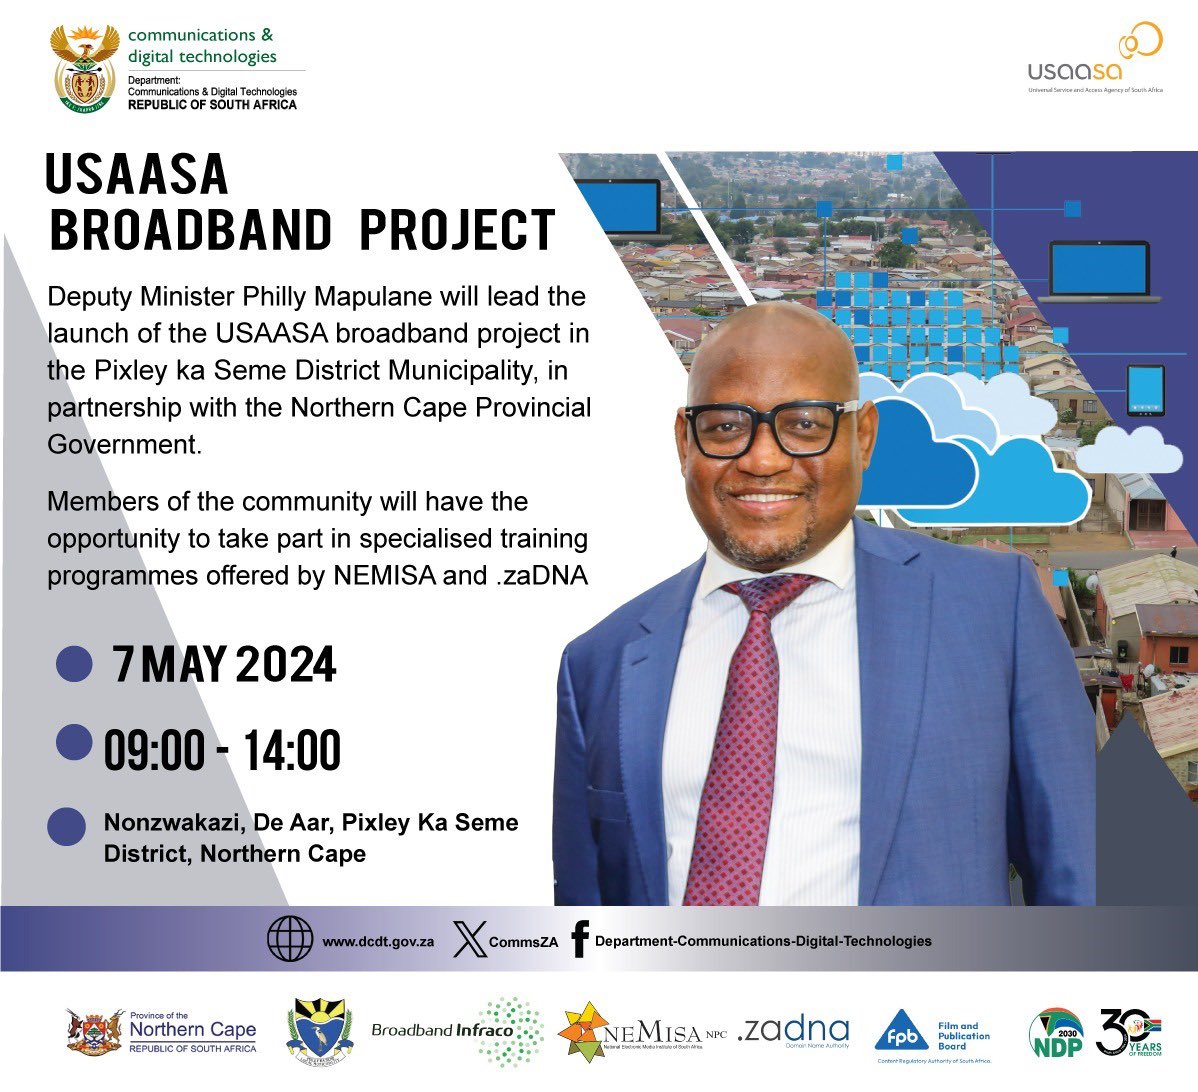 Deputy Minister Philly Mapulane will lead the launch of the @usaasa_za broadband project in the Pixley ka Seme District Municipality, in partnership with the Northern Cape Provincial Government. #LeaveNoOneBehind #RuralTechBoost #ConnectPixleykaSeme #InternetforAll